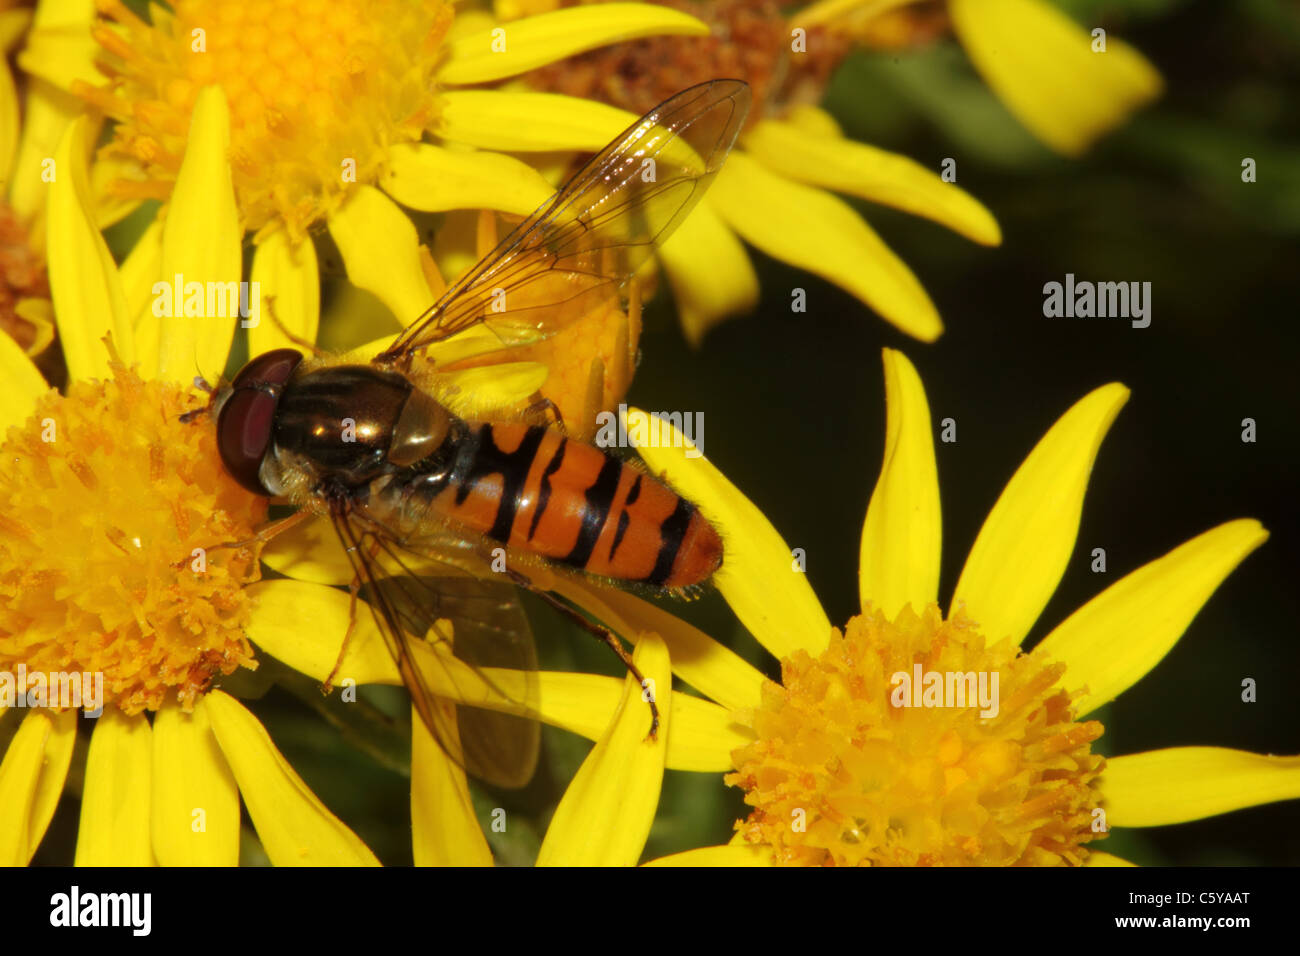 Hoverfly Episyrphus balteatus marmelade Famille Syrphidae Banque D'Images